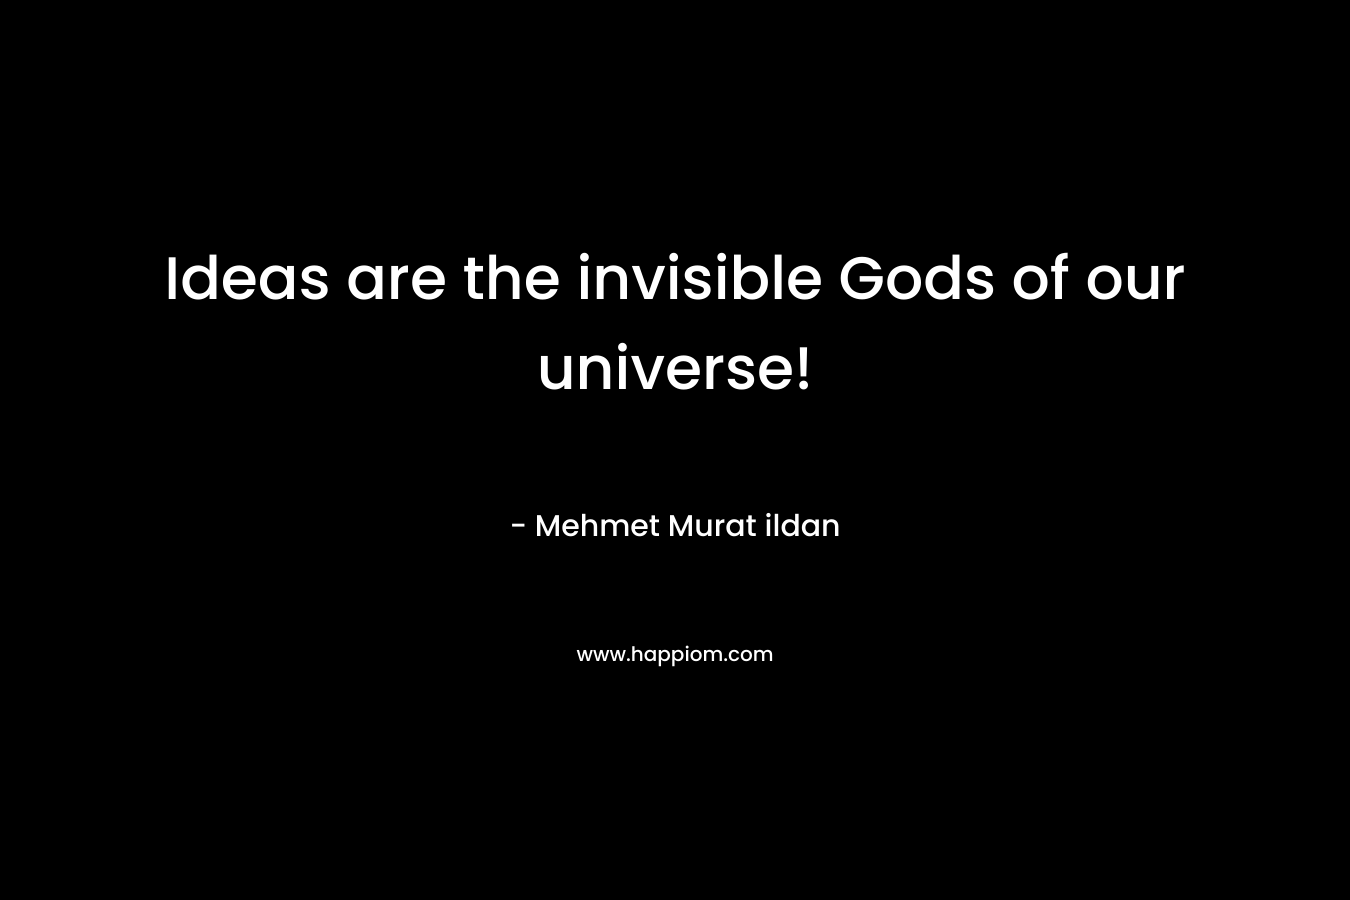 Ideas are the invisible Gods of our universe!